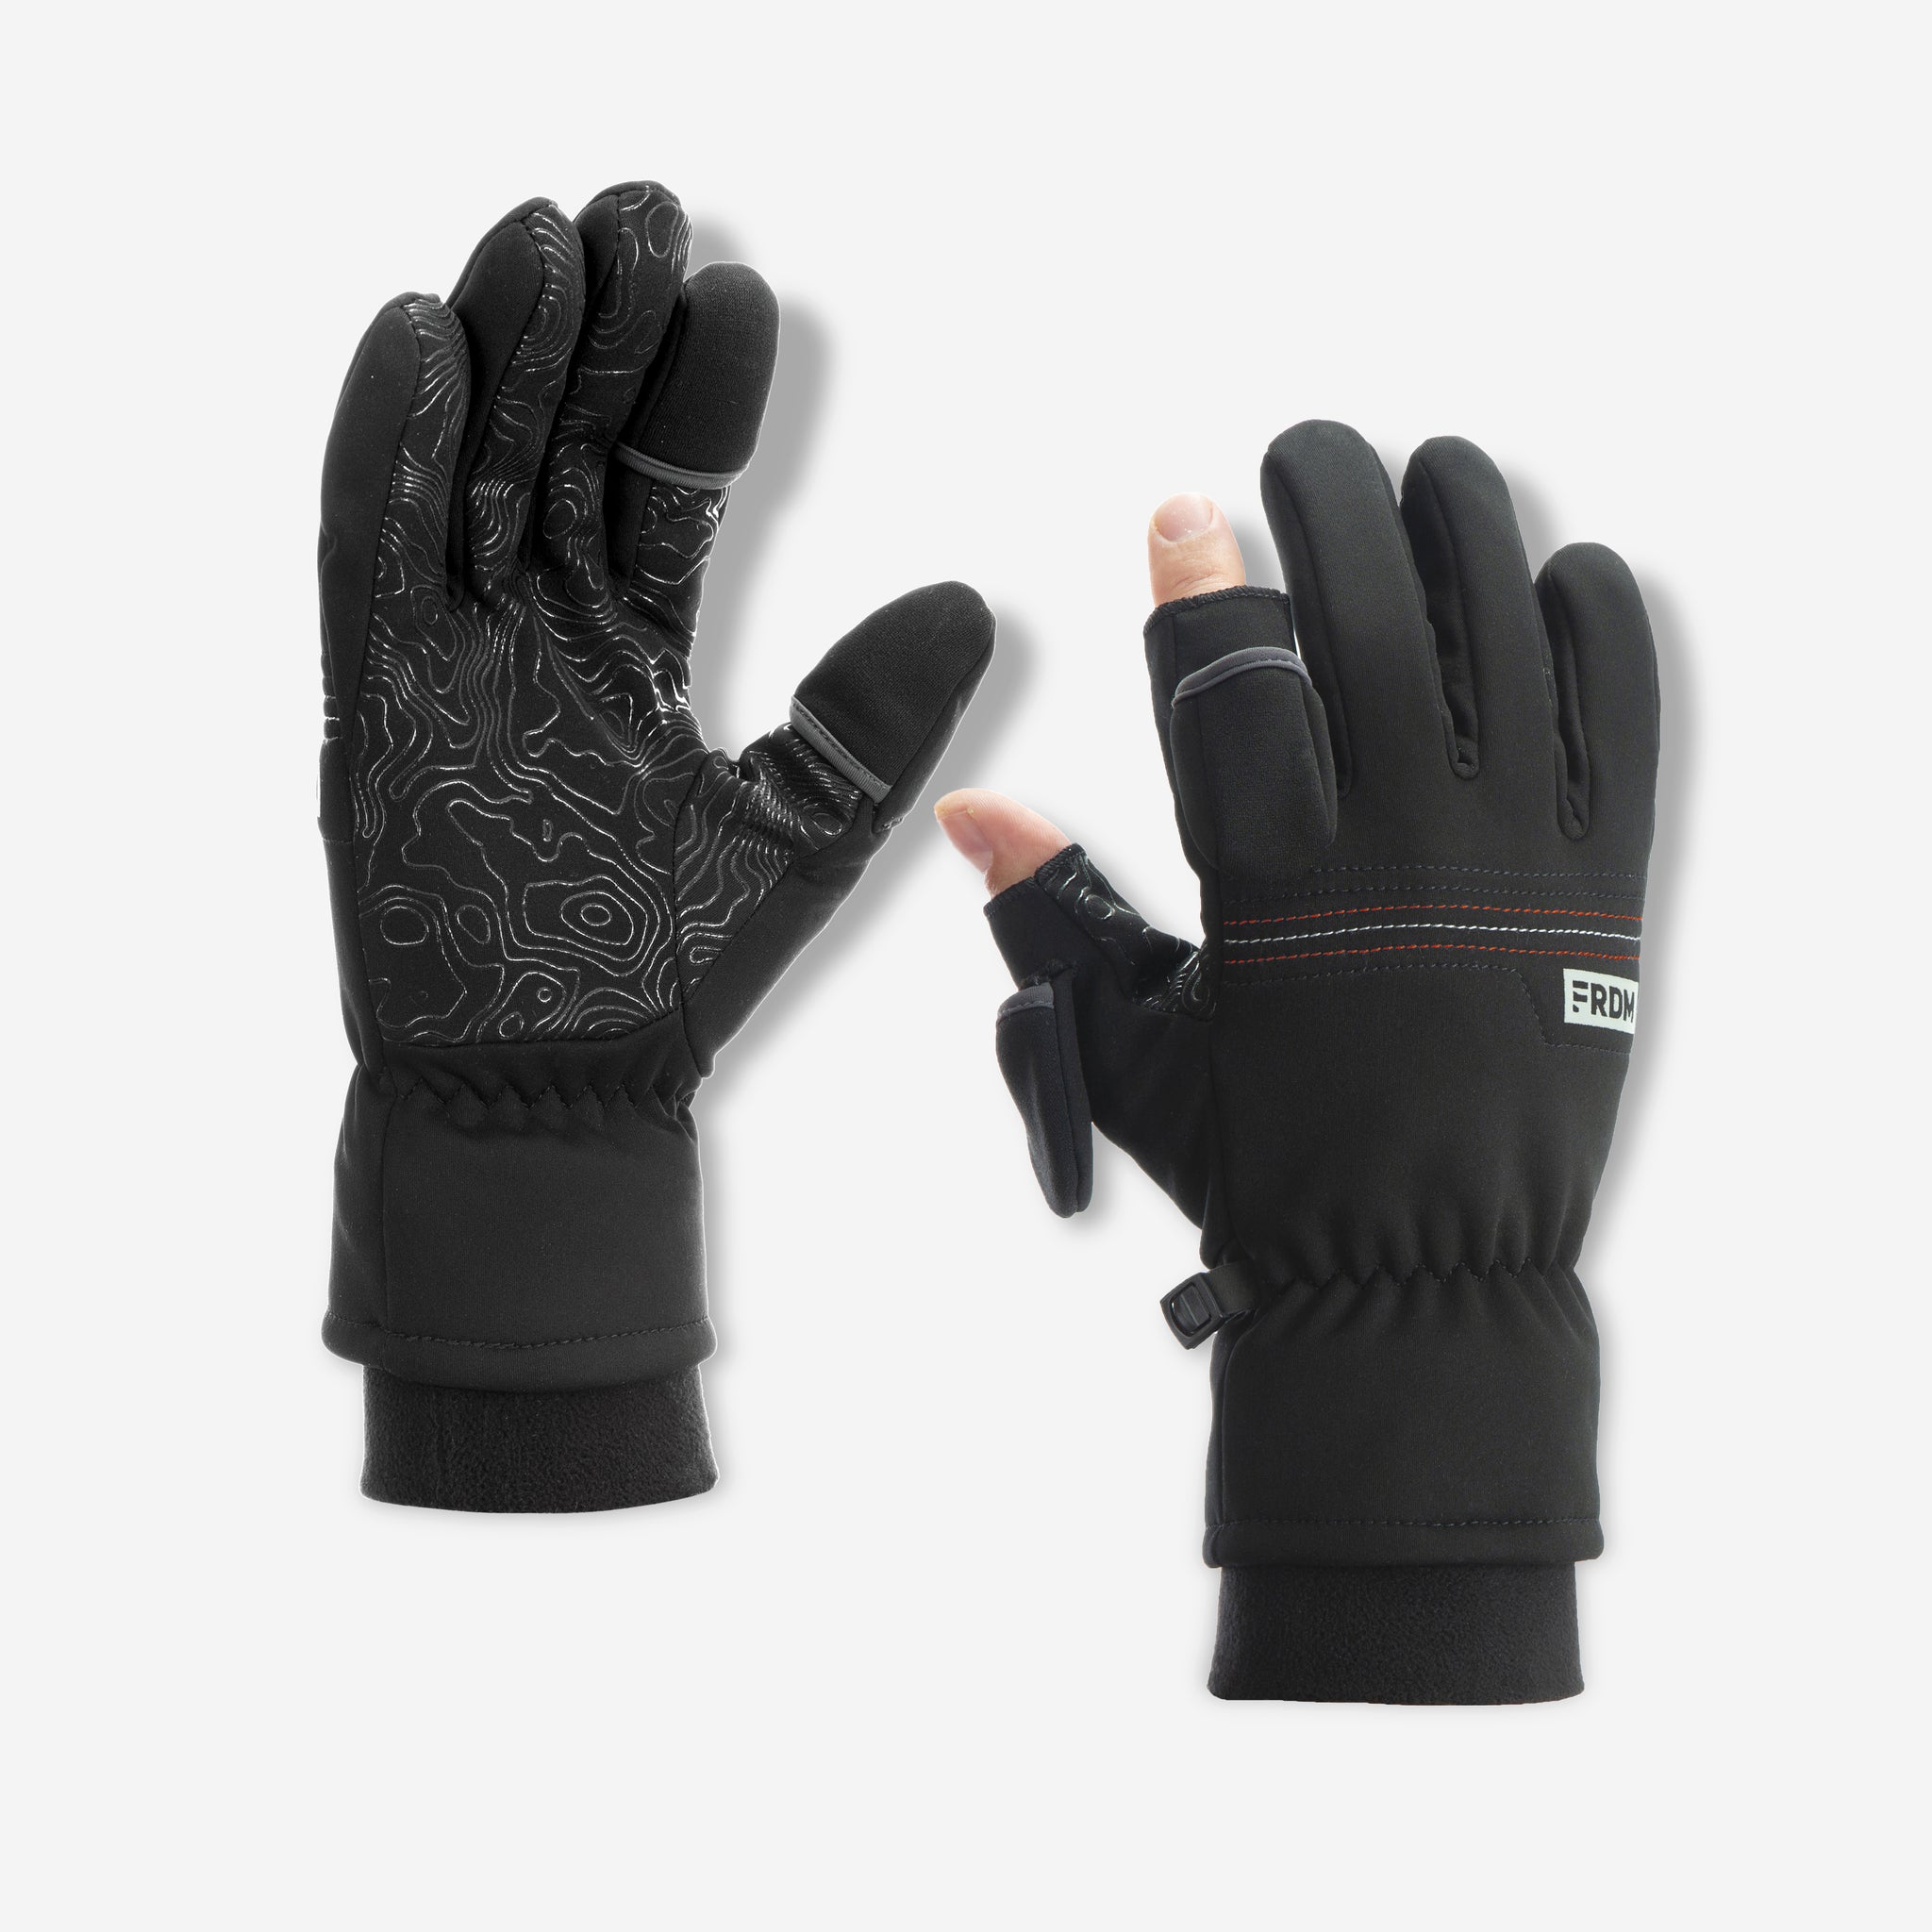 Free Fit Midweight Gloves